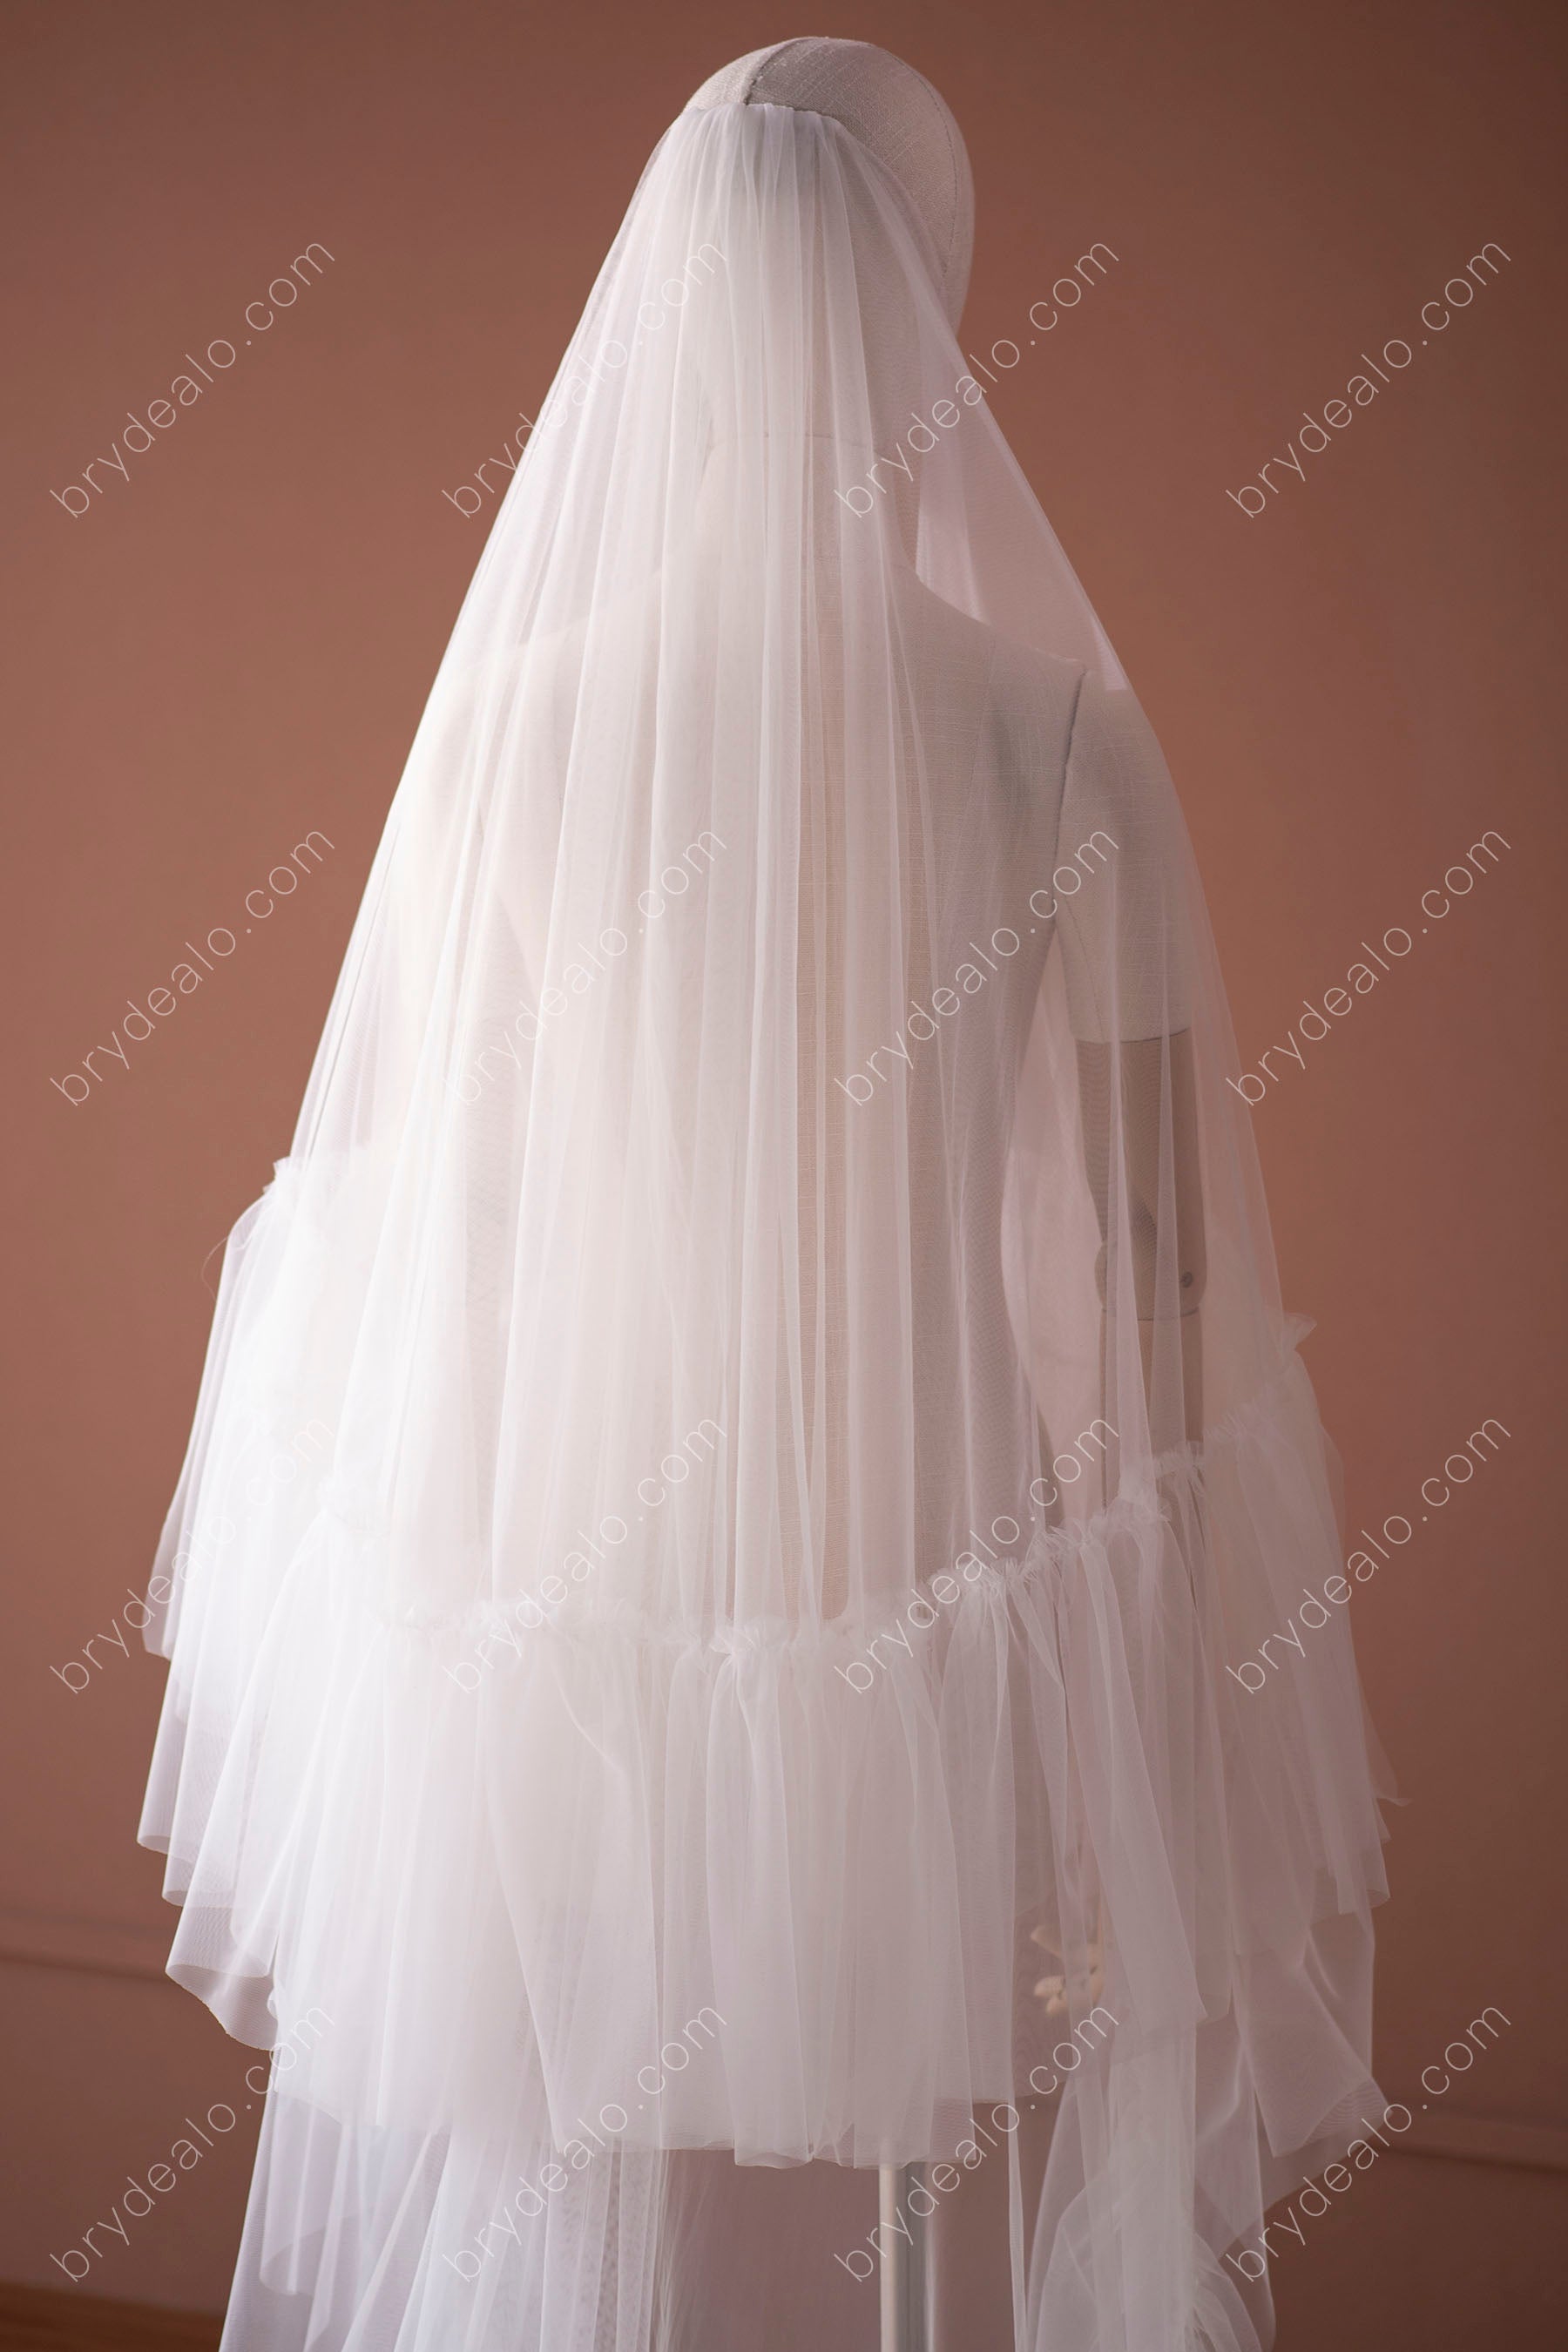 Brydealo Factory Two-Tier Cathedral Length Ruffled Bridal Veil